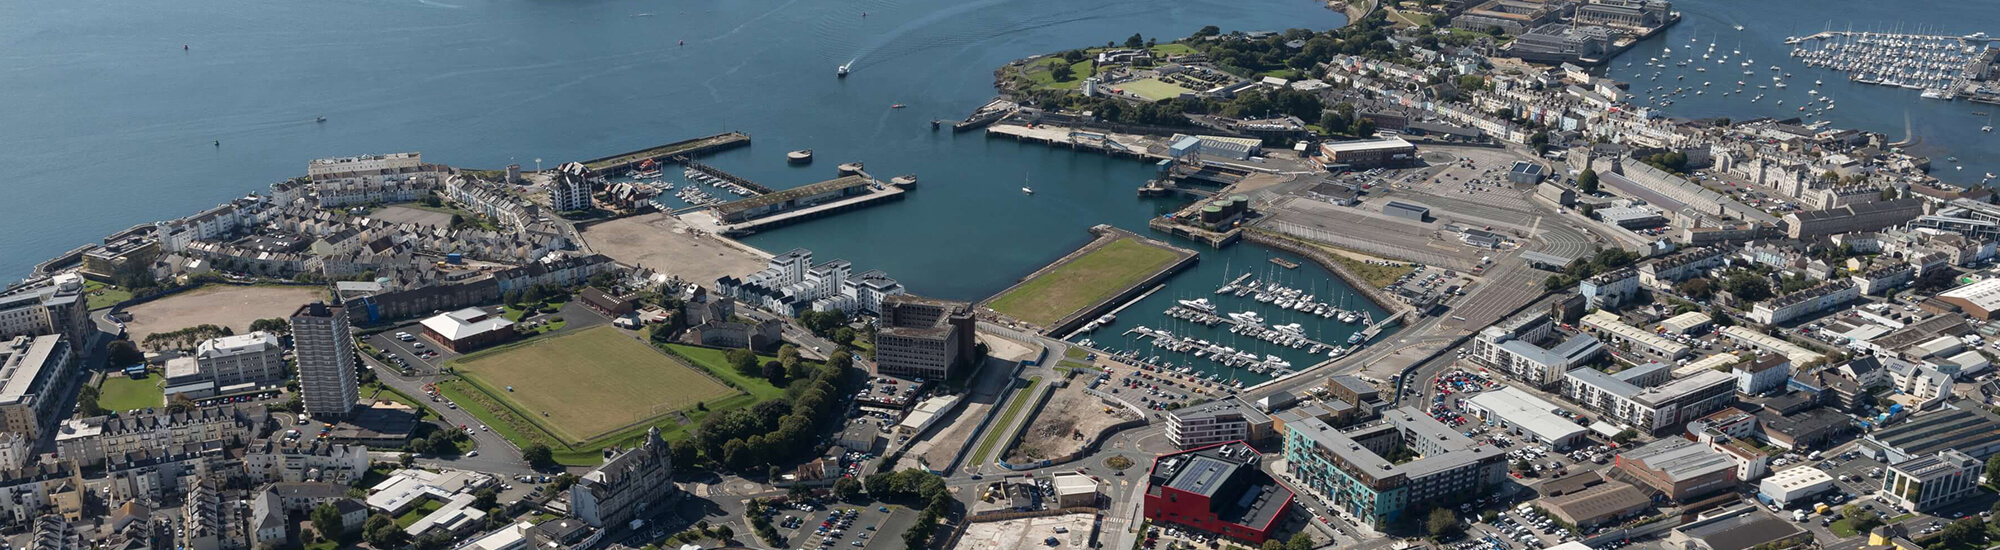 to the bustling Plymouth city centre, overlooking the historic docks, Drake...